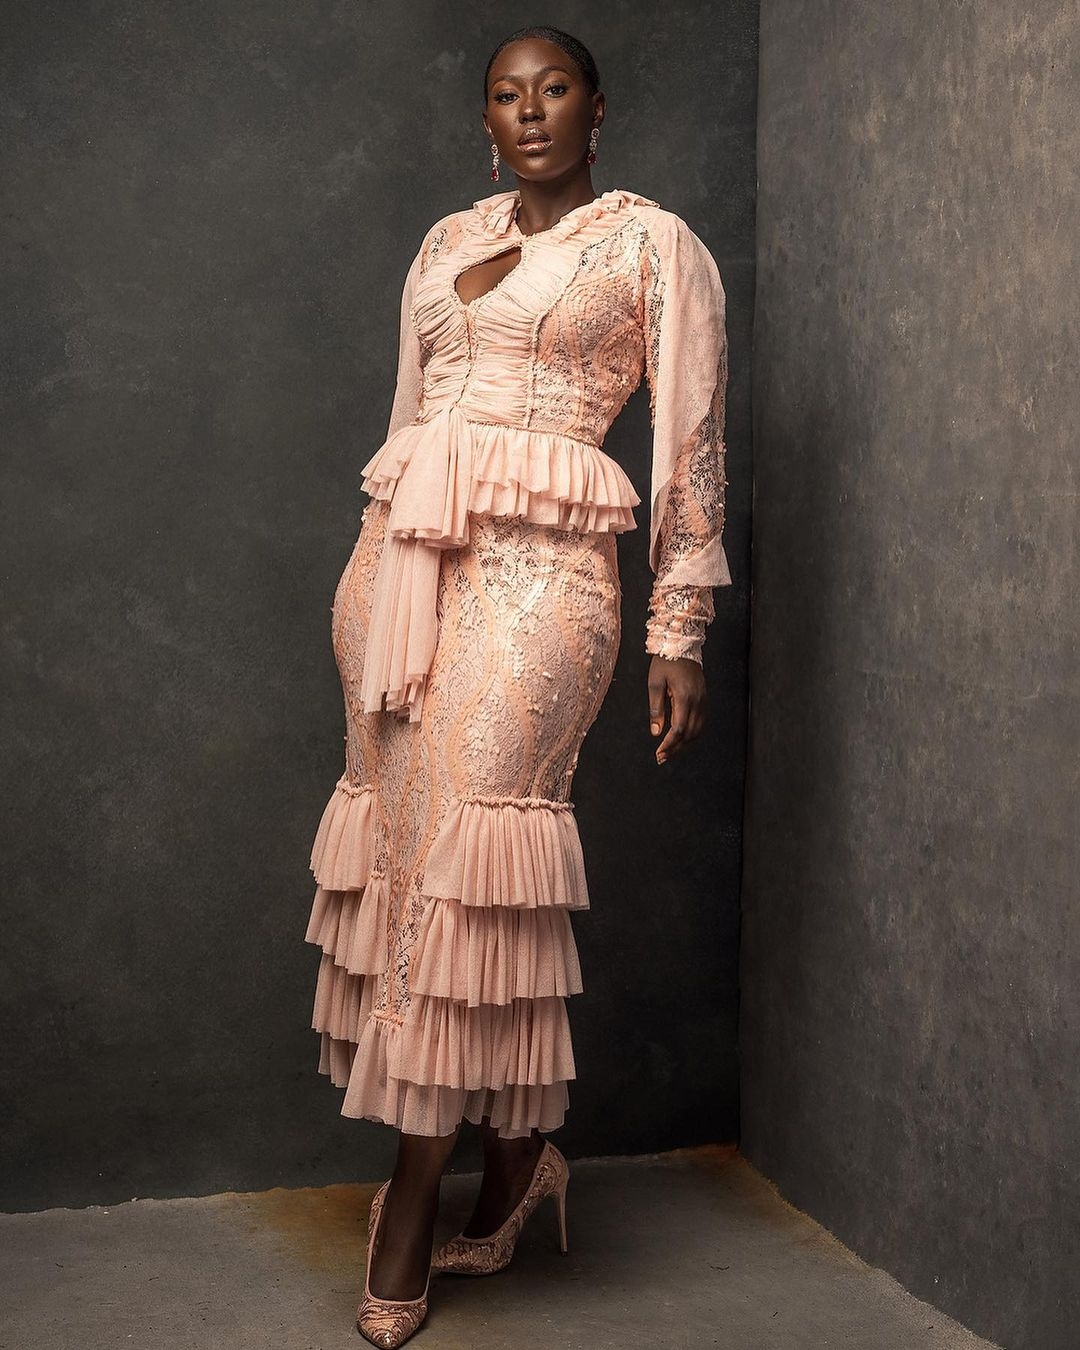 Nollywood Star Shaffy Bello Fronts Constance Walter’s Latest Collection Tagged “Romantic Noire”